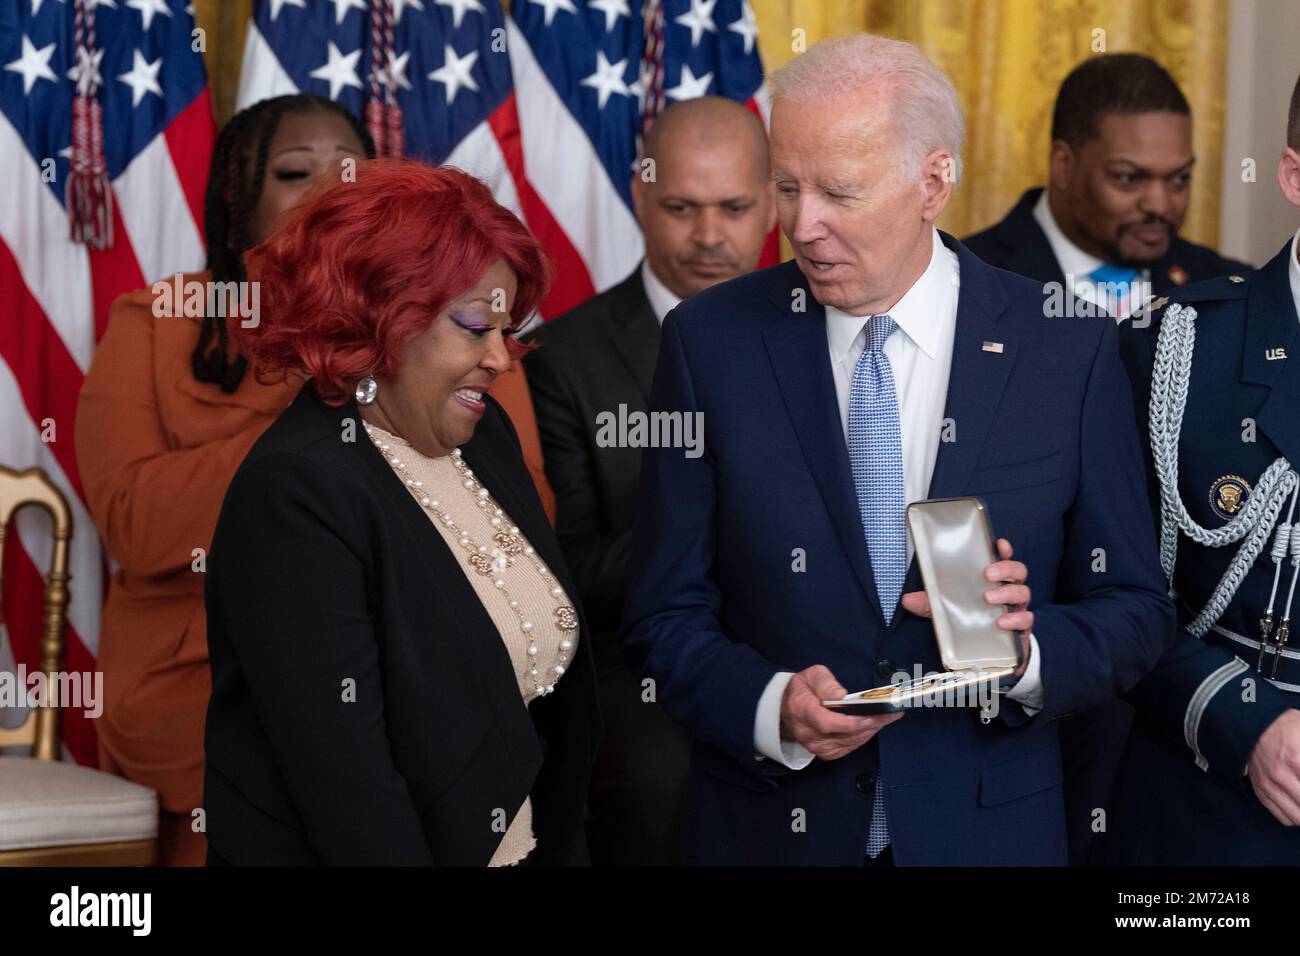 United States President Joe Biden presents the the Presidential Citizens Medal to Georgia poll worker Ruby Freeman during a ceremony marking the the two-year anniversary of the January 6th insurrection at the White House in Washington, DC, Friday, January 6, 2023. Biden awarded the Presidential Citizens Medal to Capitol Police Officer Eugene Goodman, Former Washington, DC police Officer Michael Fanone, Capitol Police Officer Caroline Edwards, Capitol Police Officer Brian Sicknick (posthumously), Election Workers Shaye Moss and her mother Ruby Freeman, Arizona House speaker Rusty Bowers, Al Sch Stock Photo